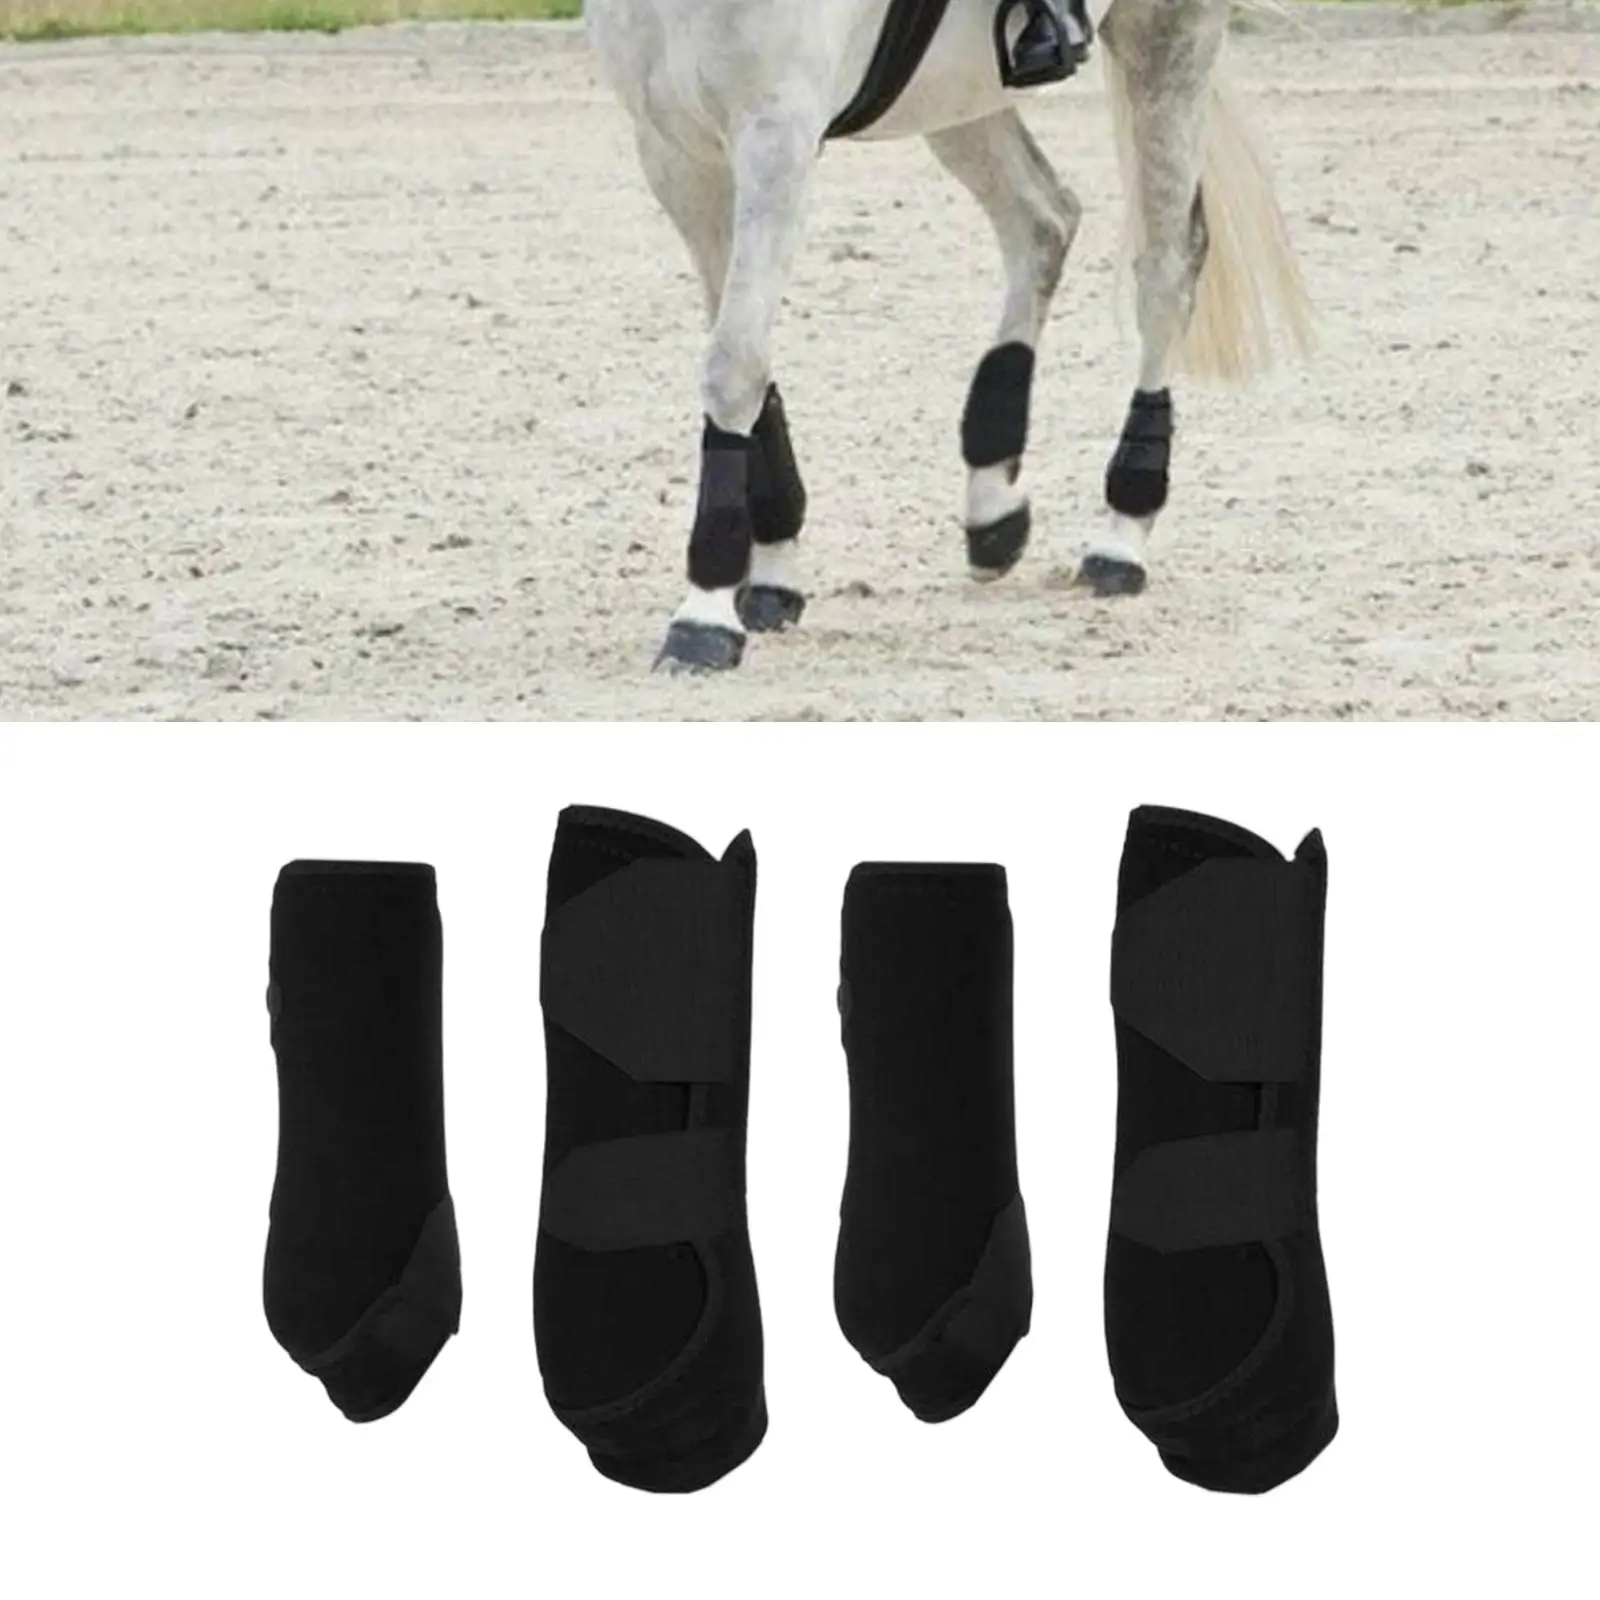 4x Neoprene Horse Boots Leg Protection Wraps Shock Absorbing Protector Gear for Jumping Riding Training Equestrian Equipment